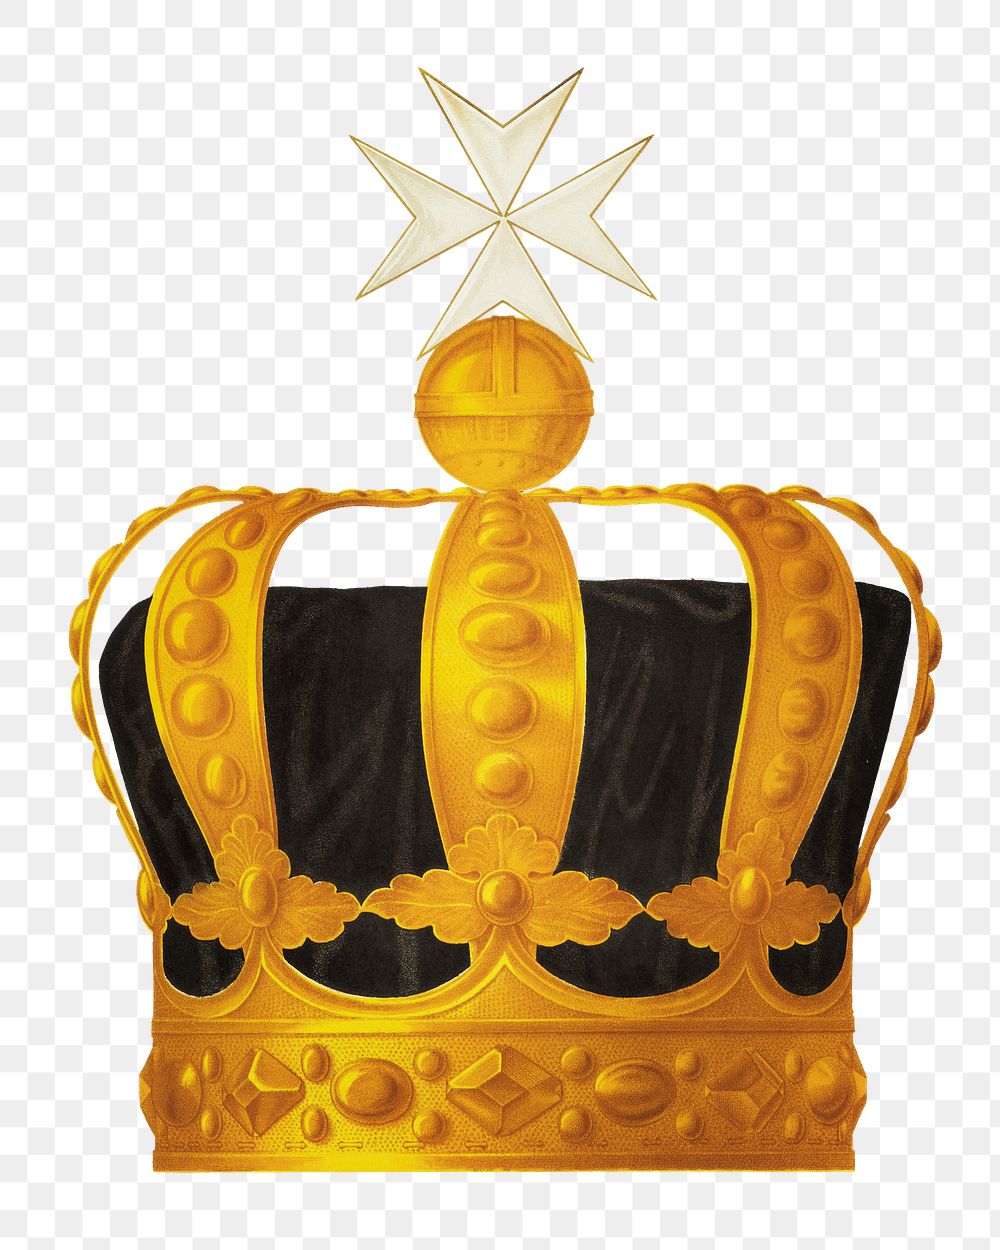 Maltese crown png sticker, transparent background.   Remastered by rawpixel